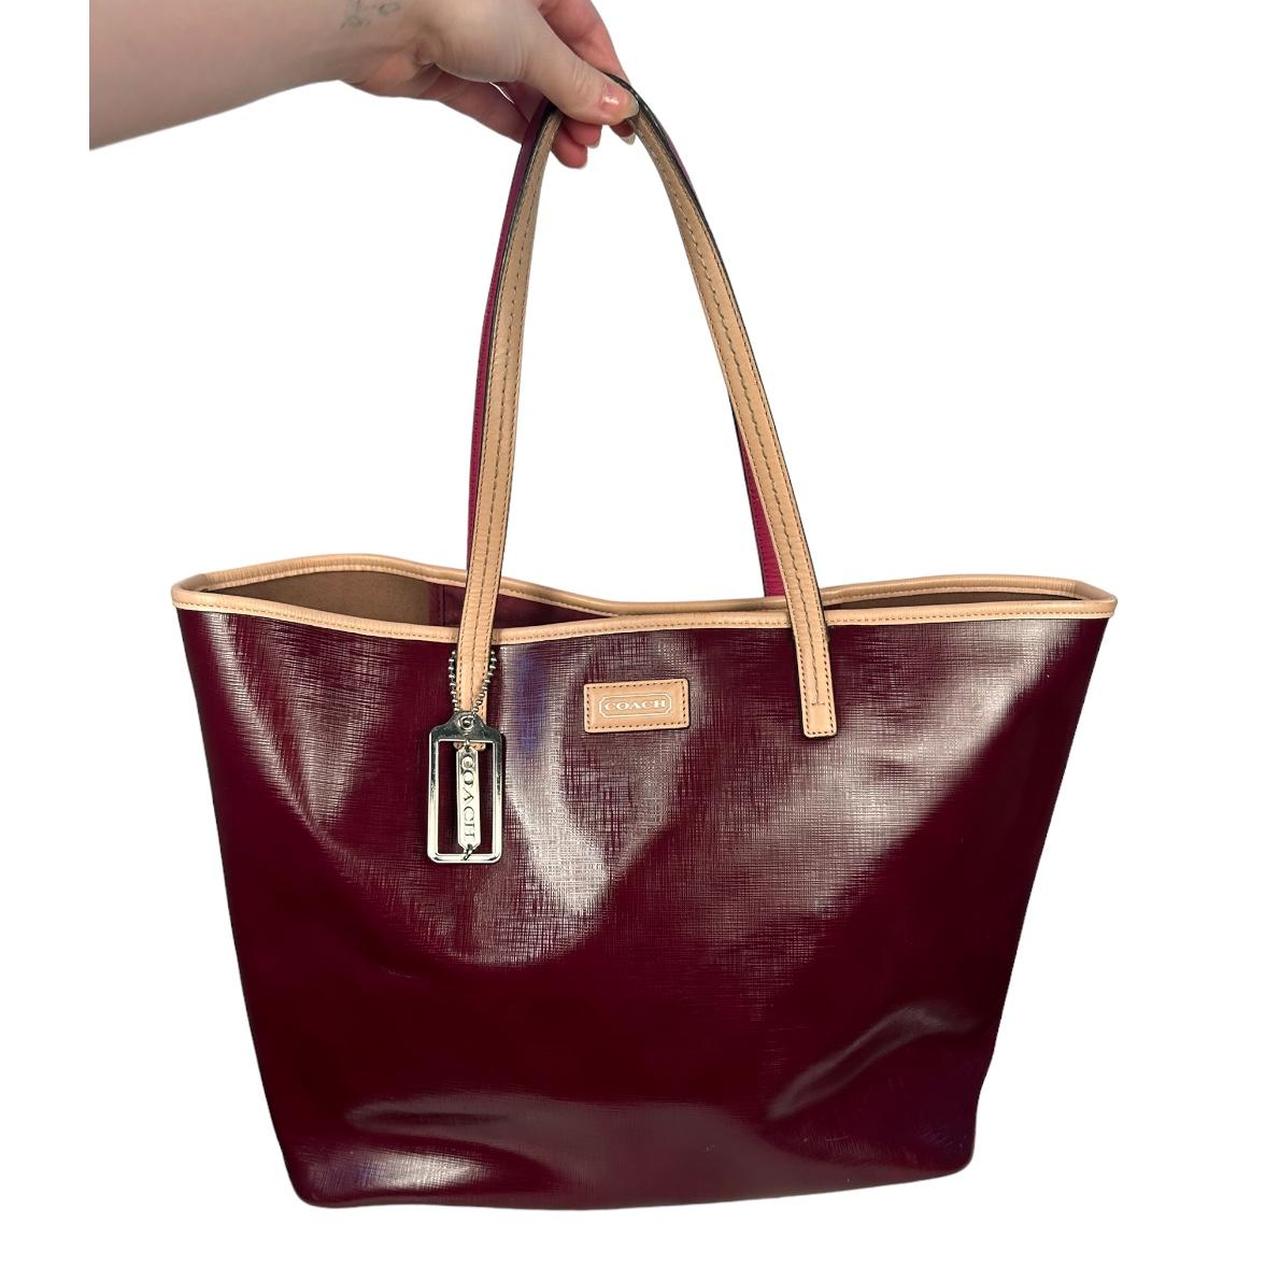 Signature sufflette leather handbag Coach Brown in Leather - 37879051